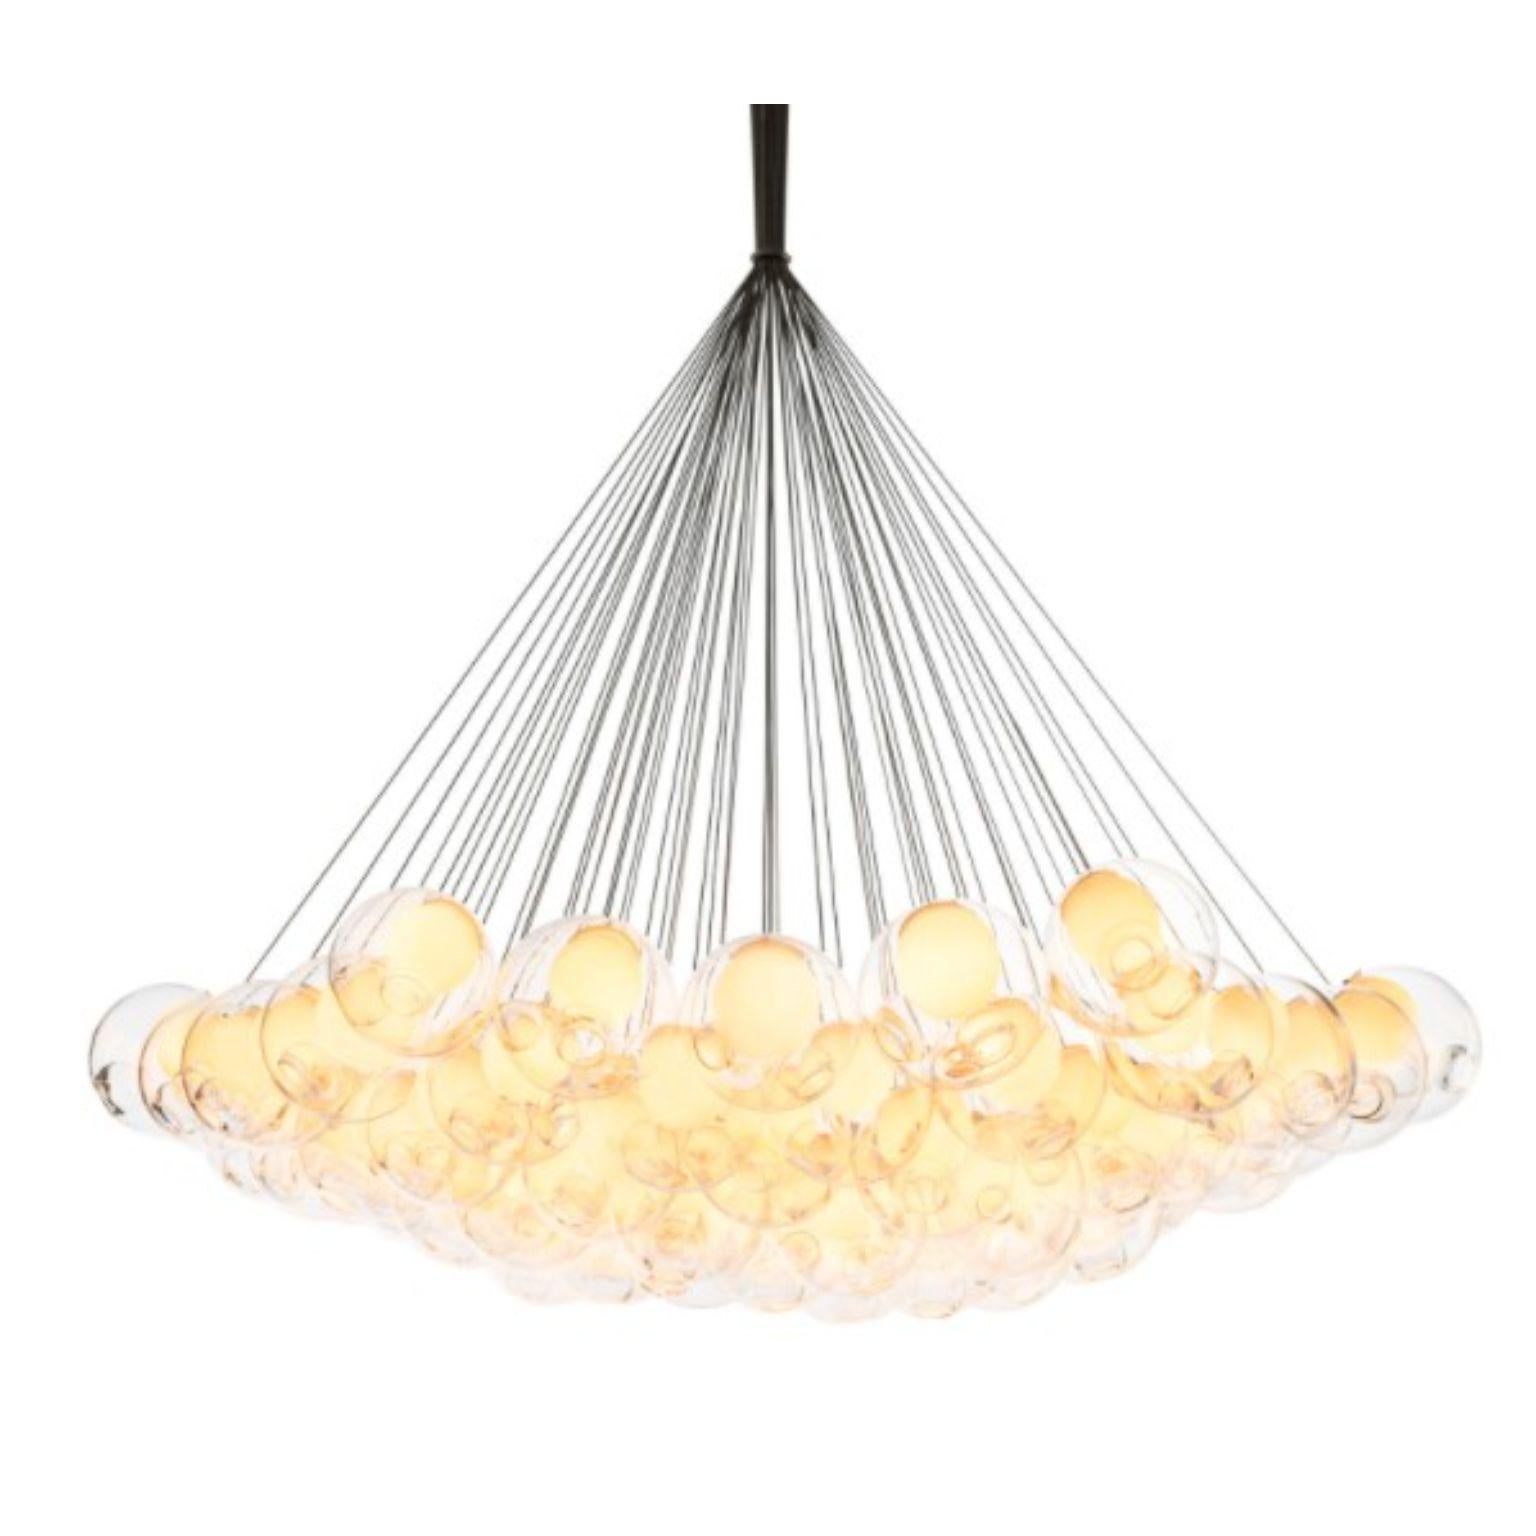 28.61 pendant by Bocci
Dimensions: D 70.1 x H 300 cm
Materials: white powder coated round canopy
Weight: 98 kg
Also available in different dimensions.

All our lamps can be wired according to each country. If sold to the USA it will be wired